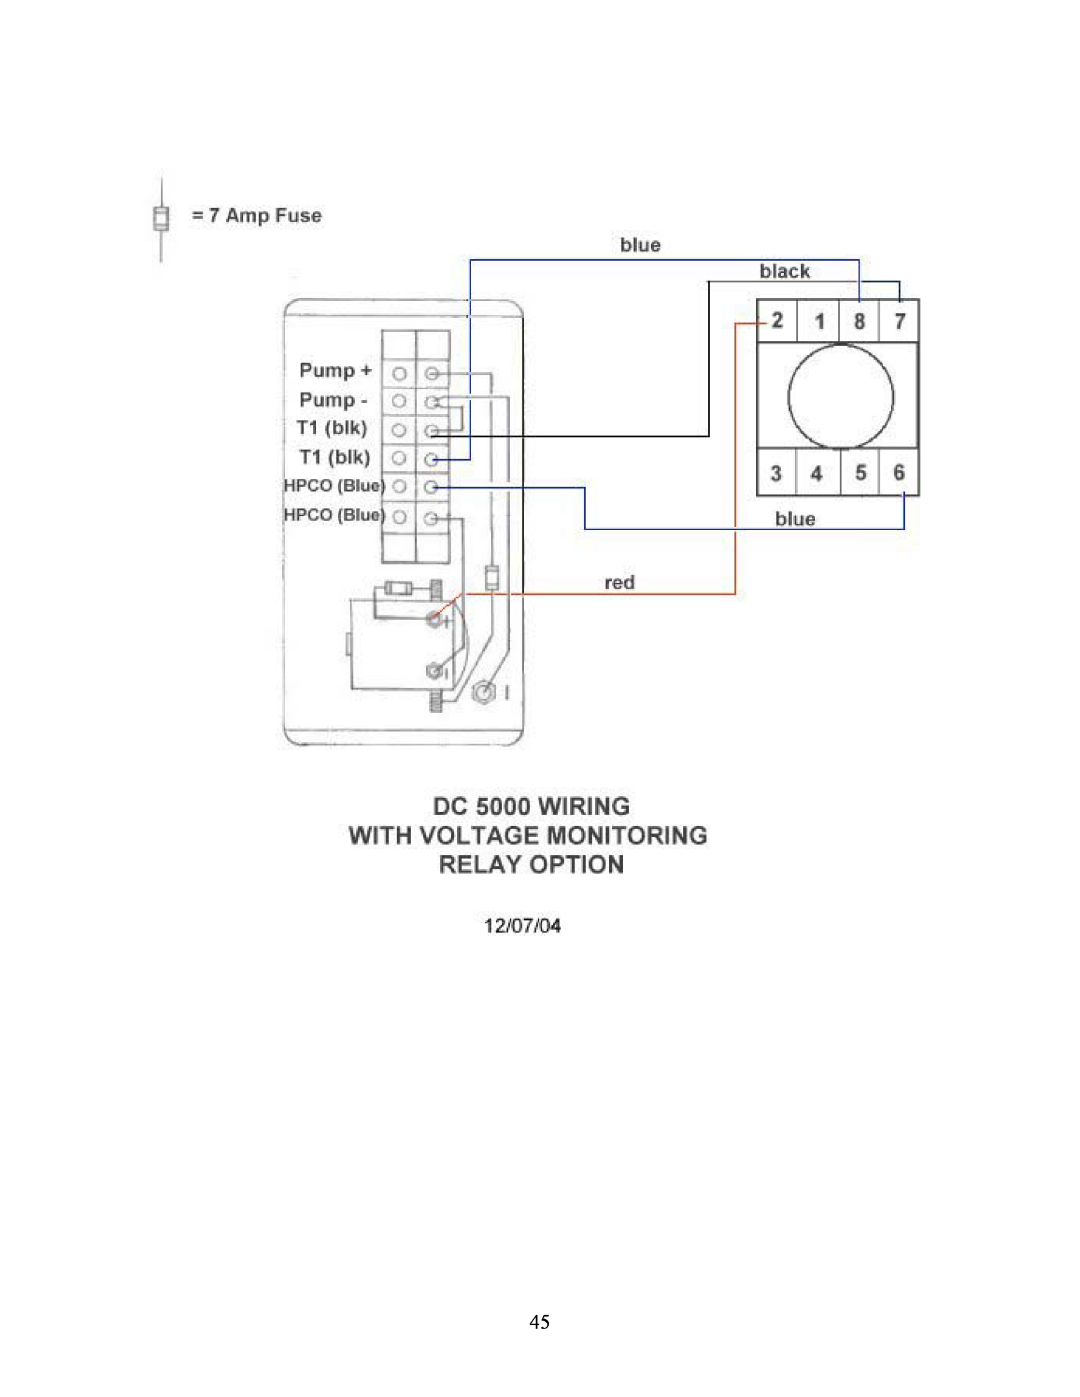 Sea Frost DC 5000 installation instructions 